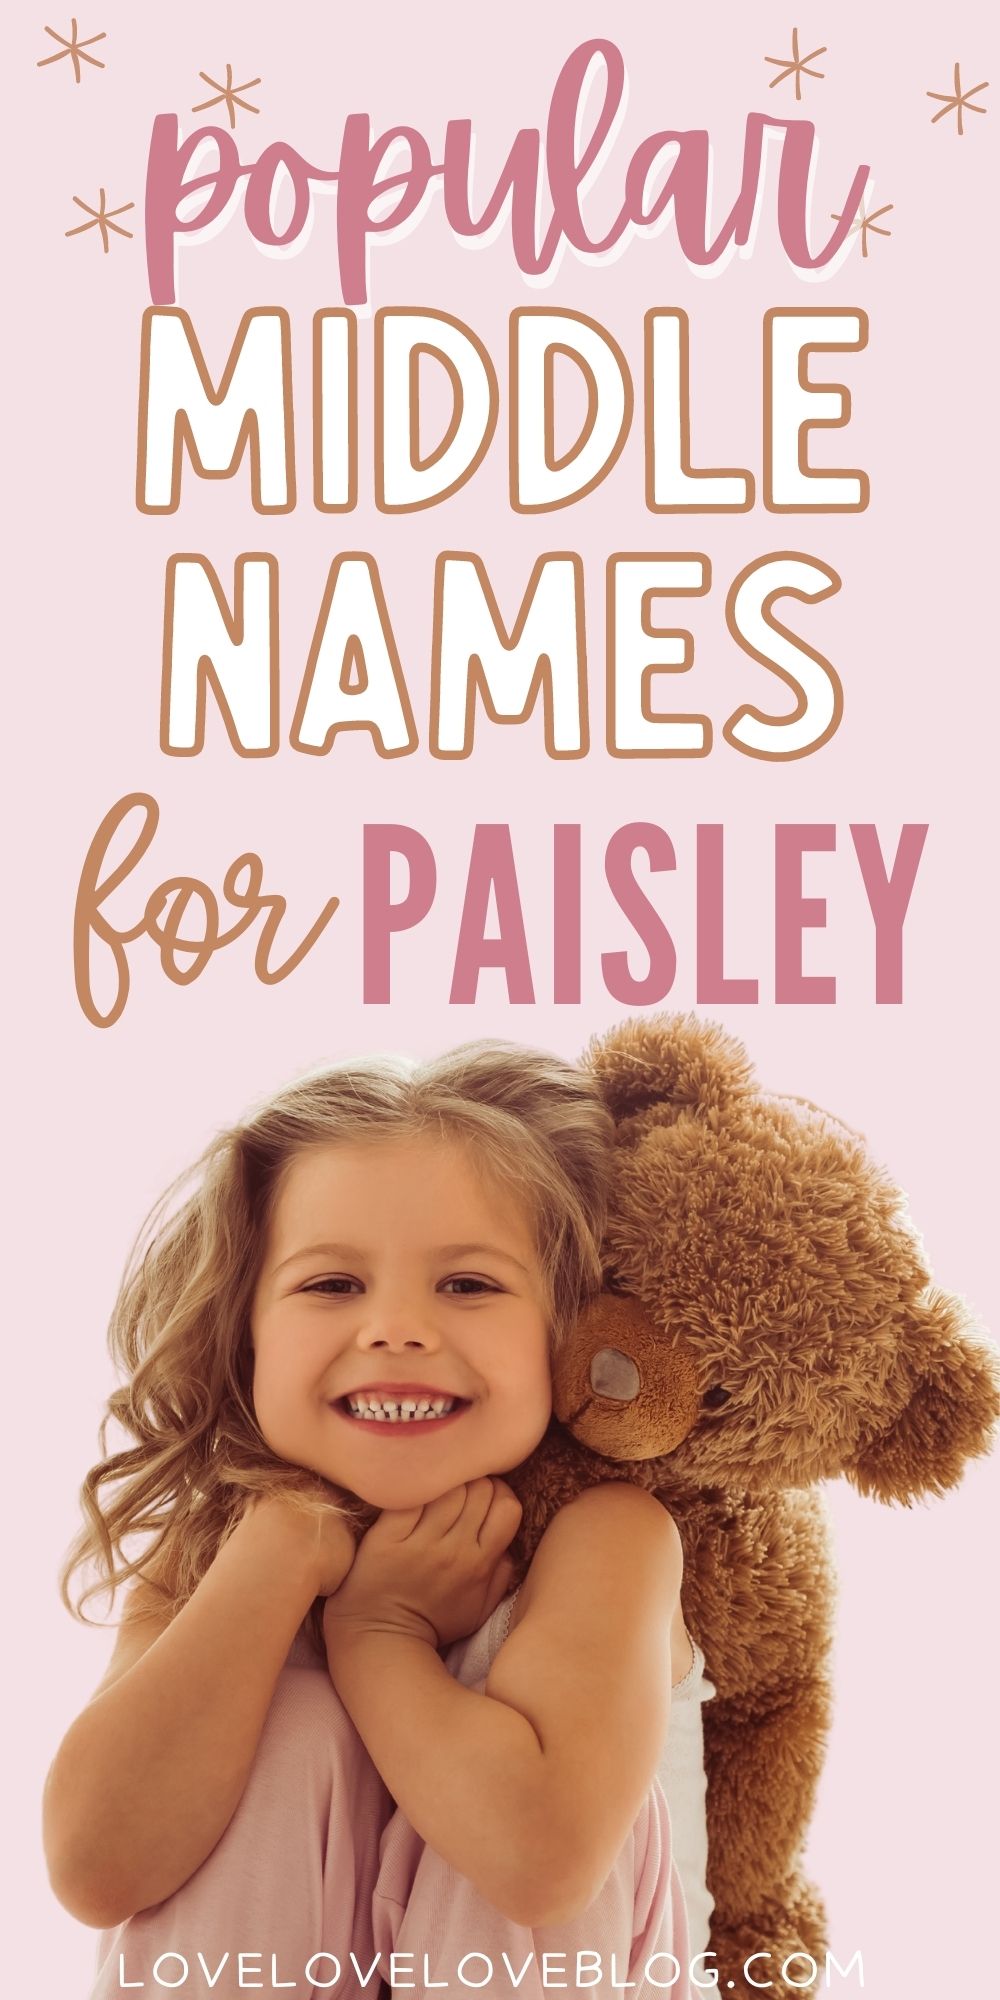 Pinterest graphic with text and a little girl holding a teddy bear.